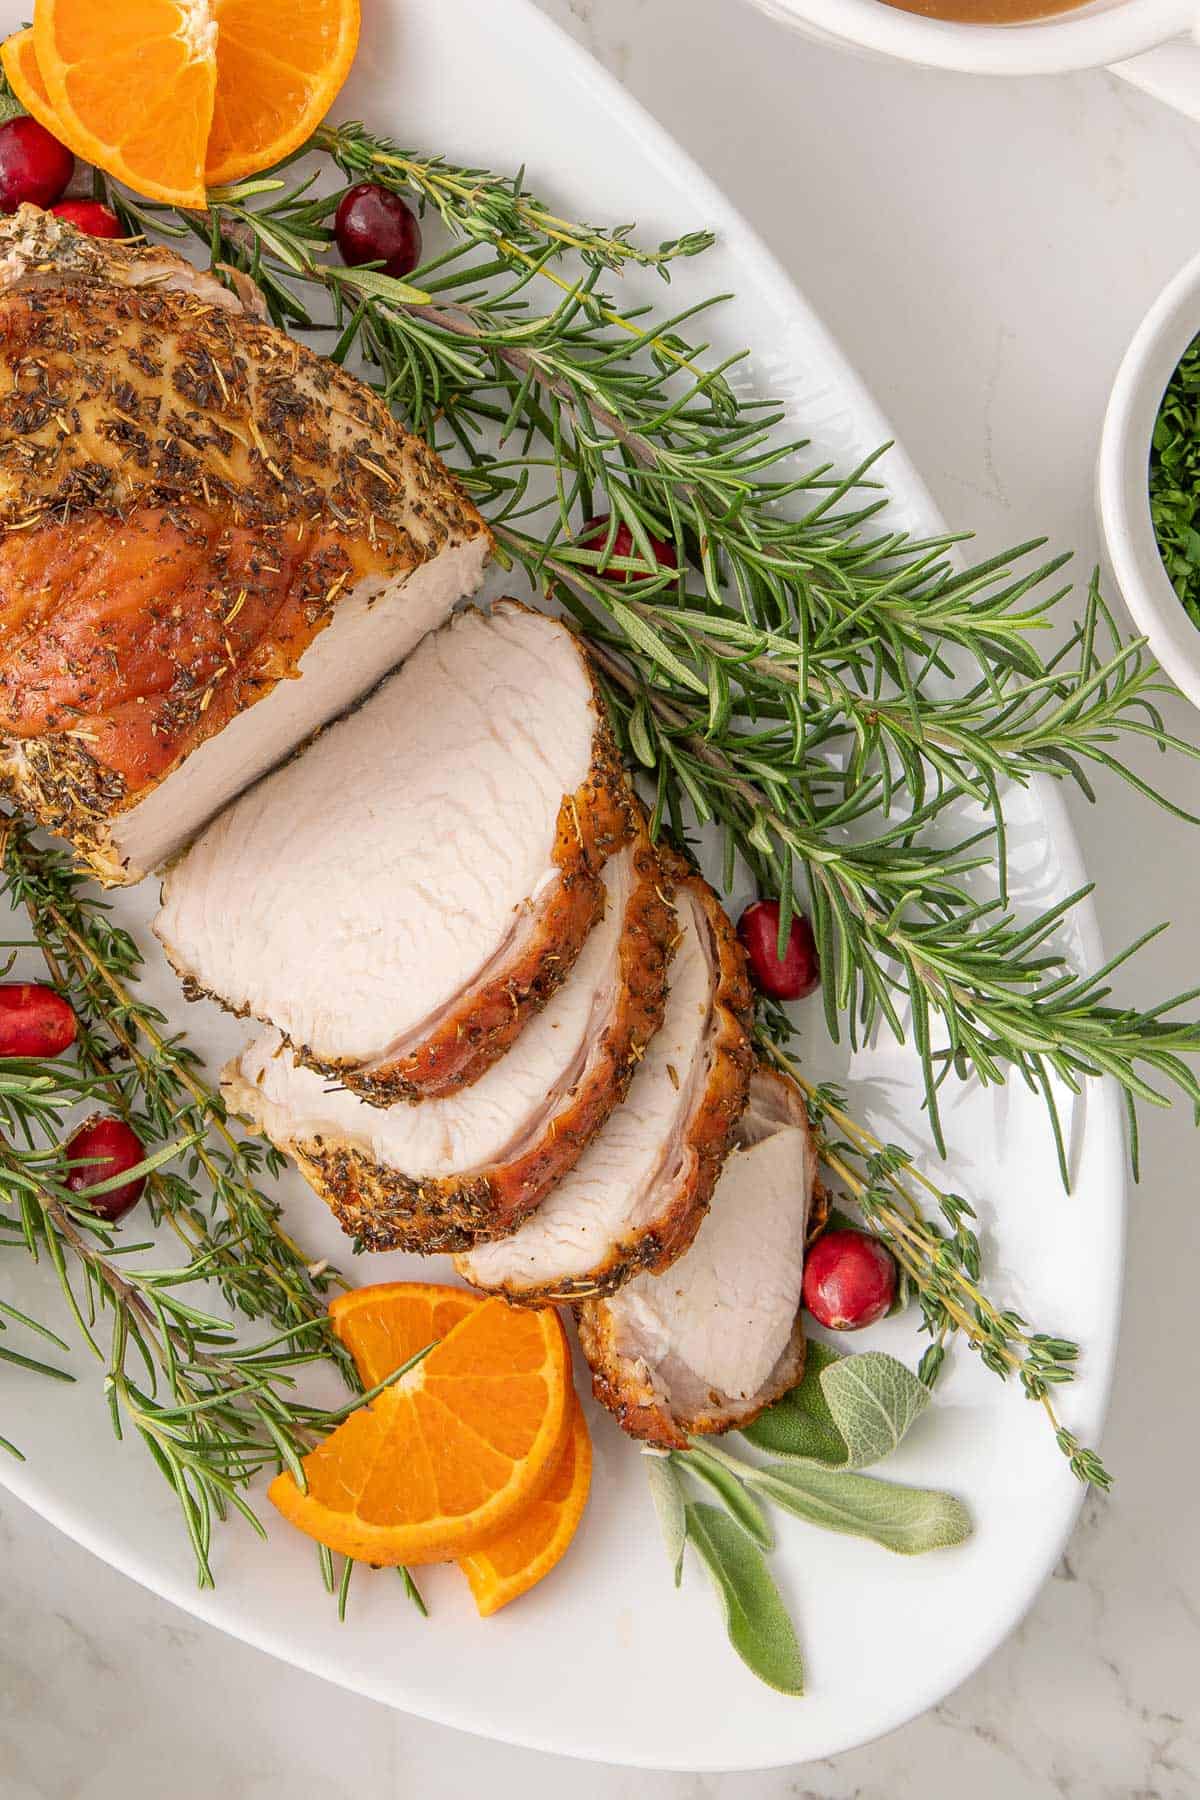 Overhead close up view of a partially sliced boneless turkey breast on an oval white platter.